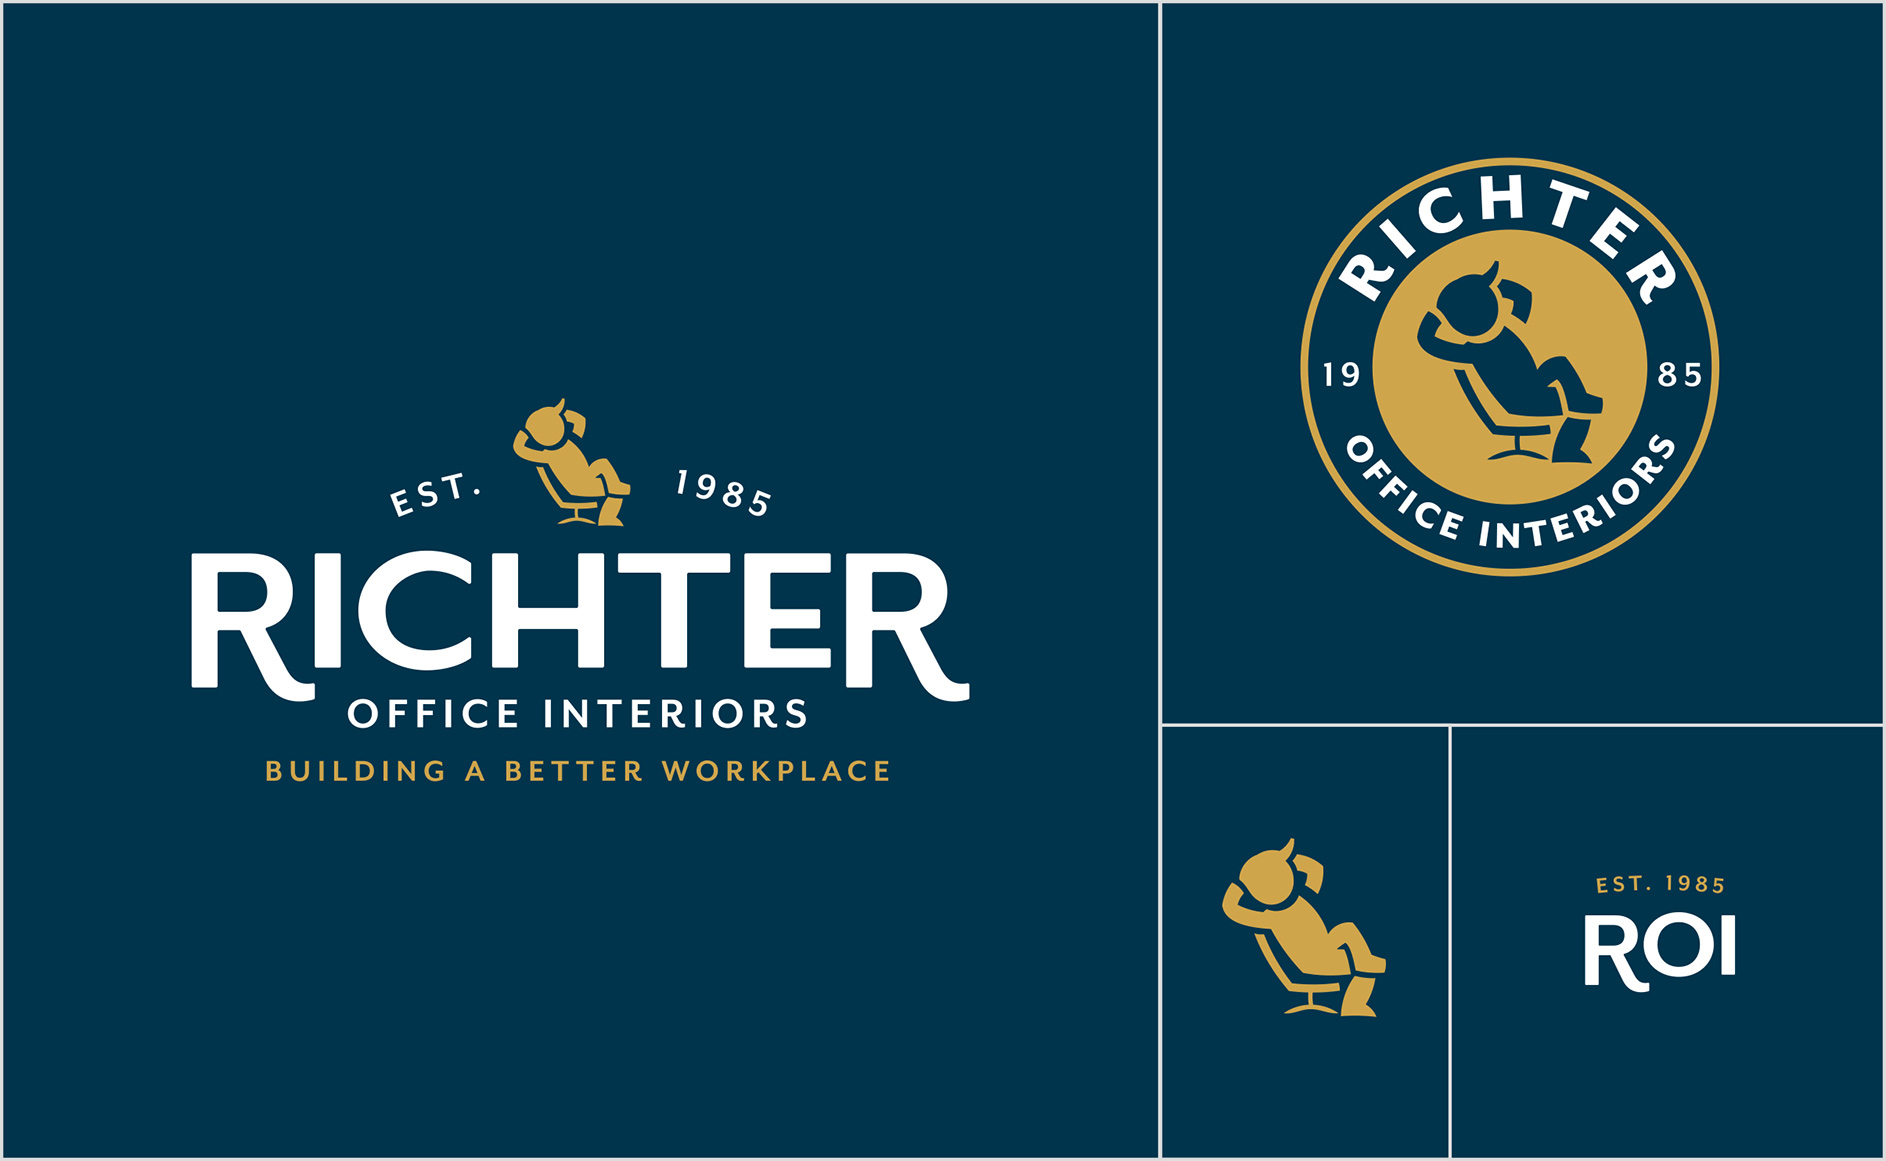 Richter Total Office Office Interiors logo page 2